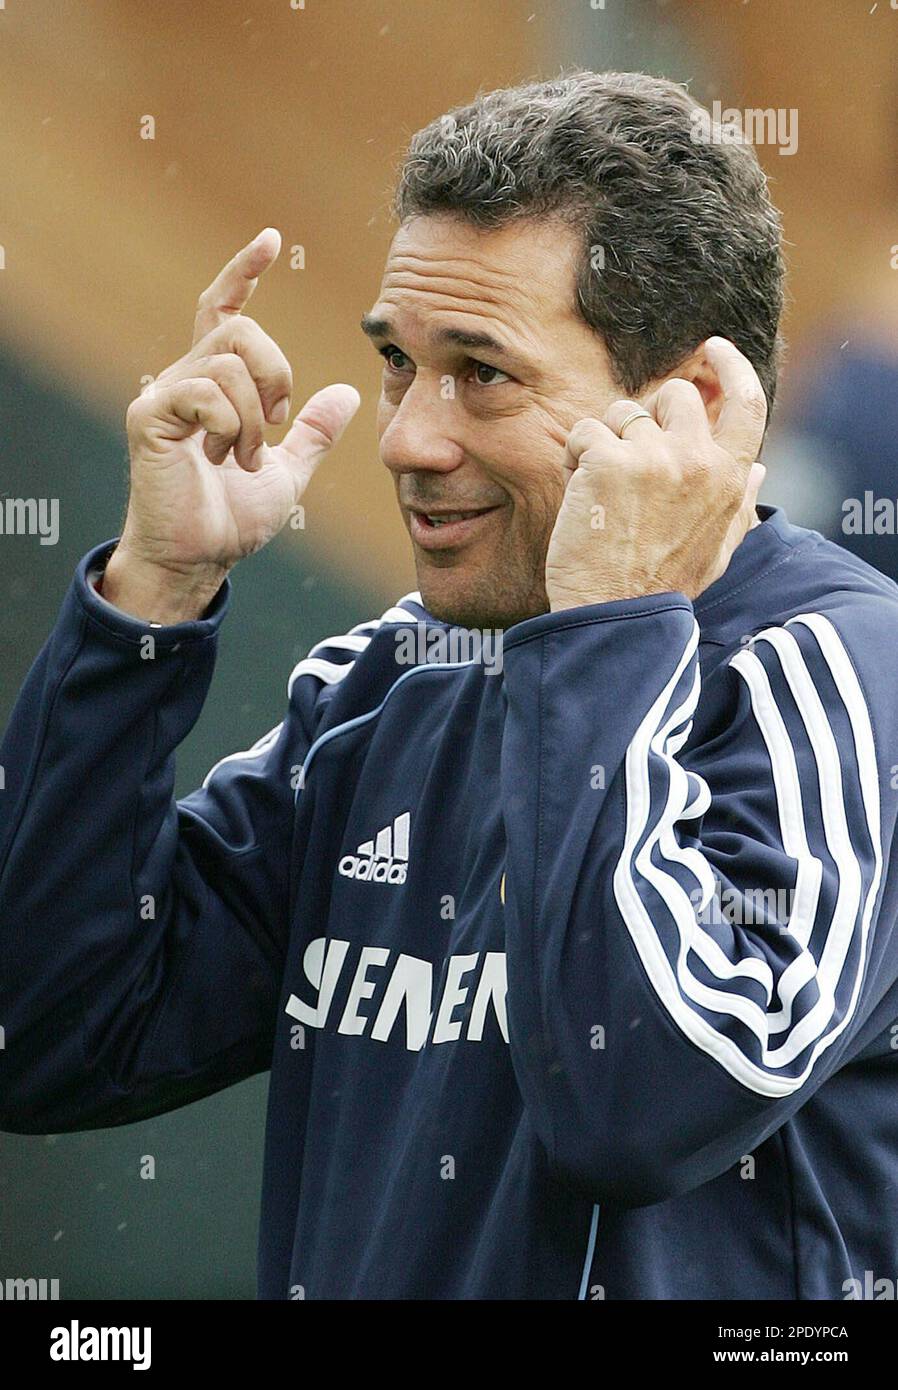 Real Madrid's coach Vanderlei Luxemburgo gestures during a Real Madrid pre-season training camp in the Austrian town of Irdning, Saturday Aug. 6, 2005. (AP Photo/Andreas Schaad) Stock Photo